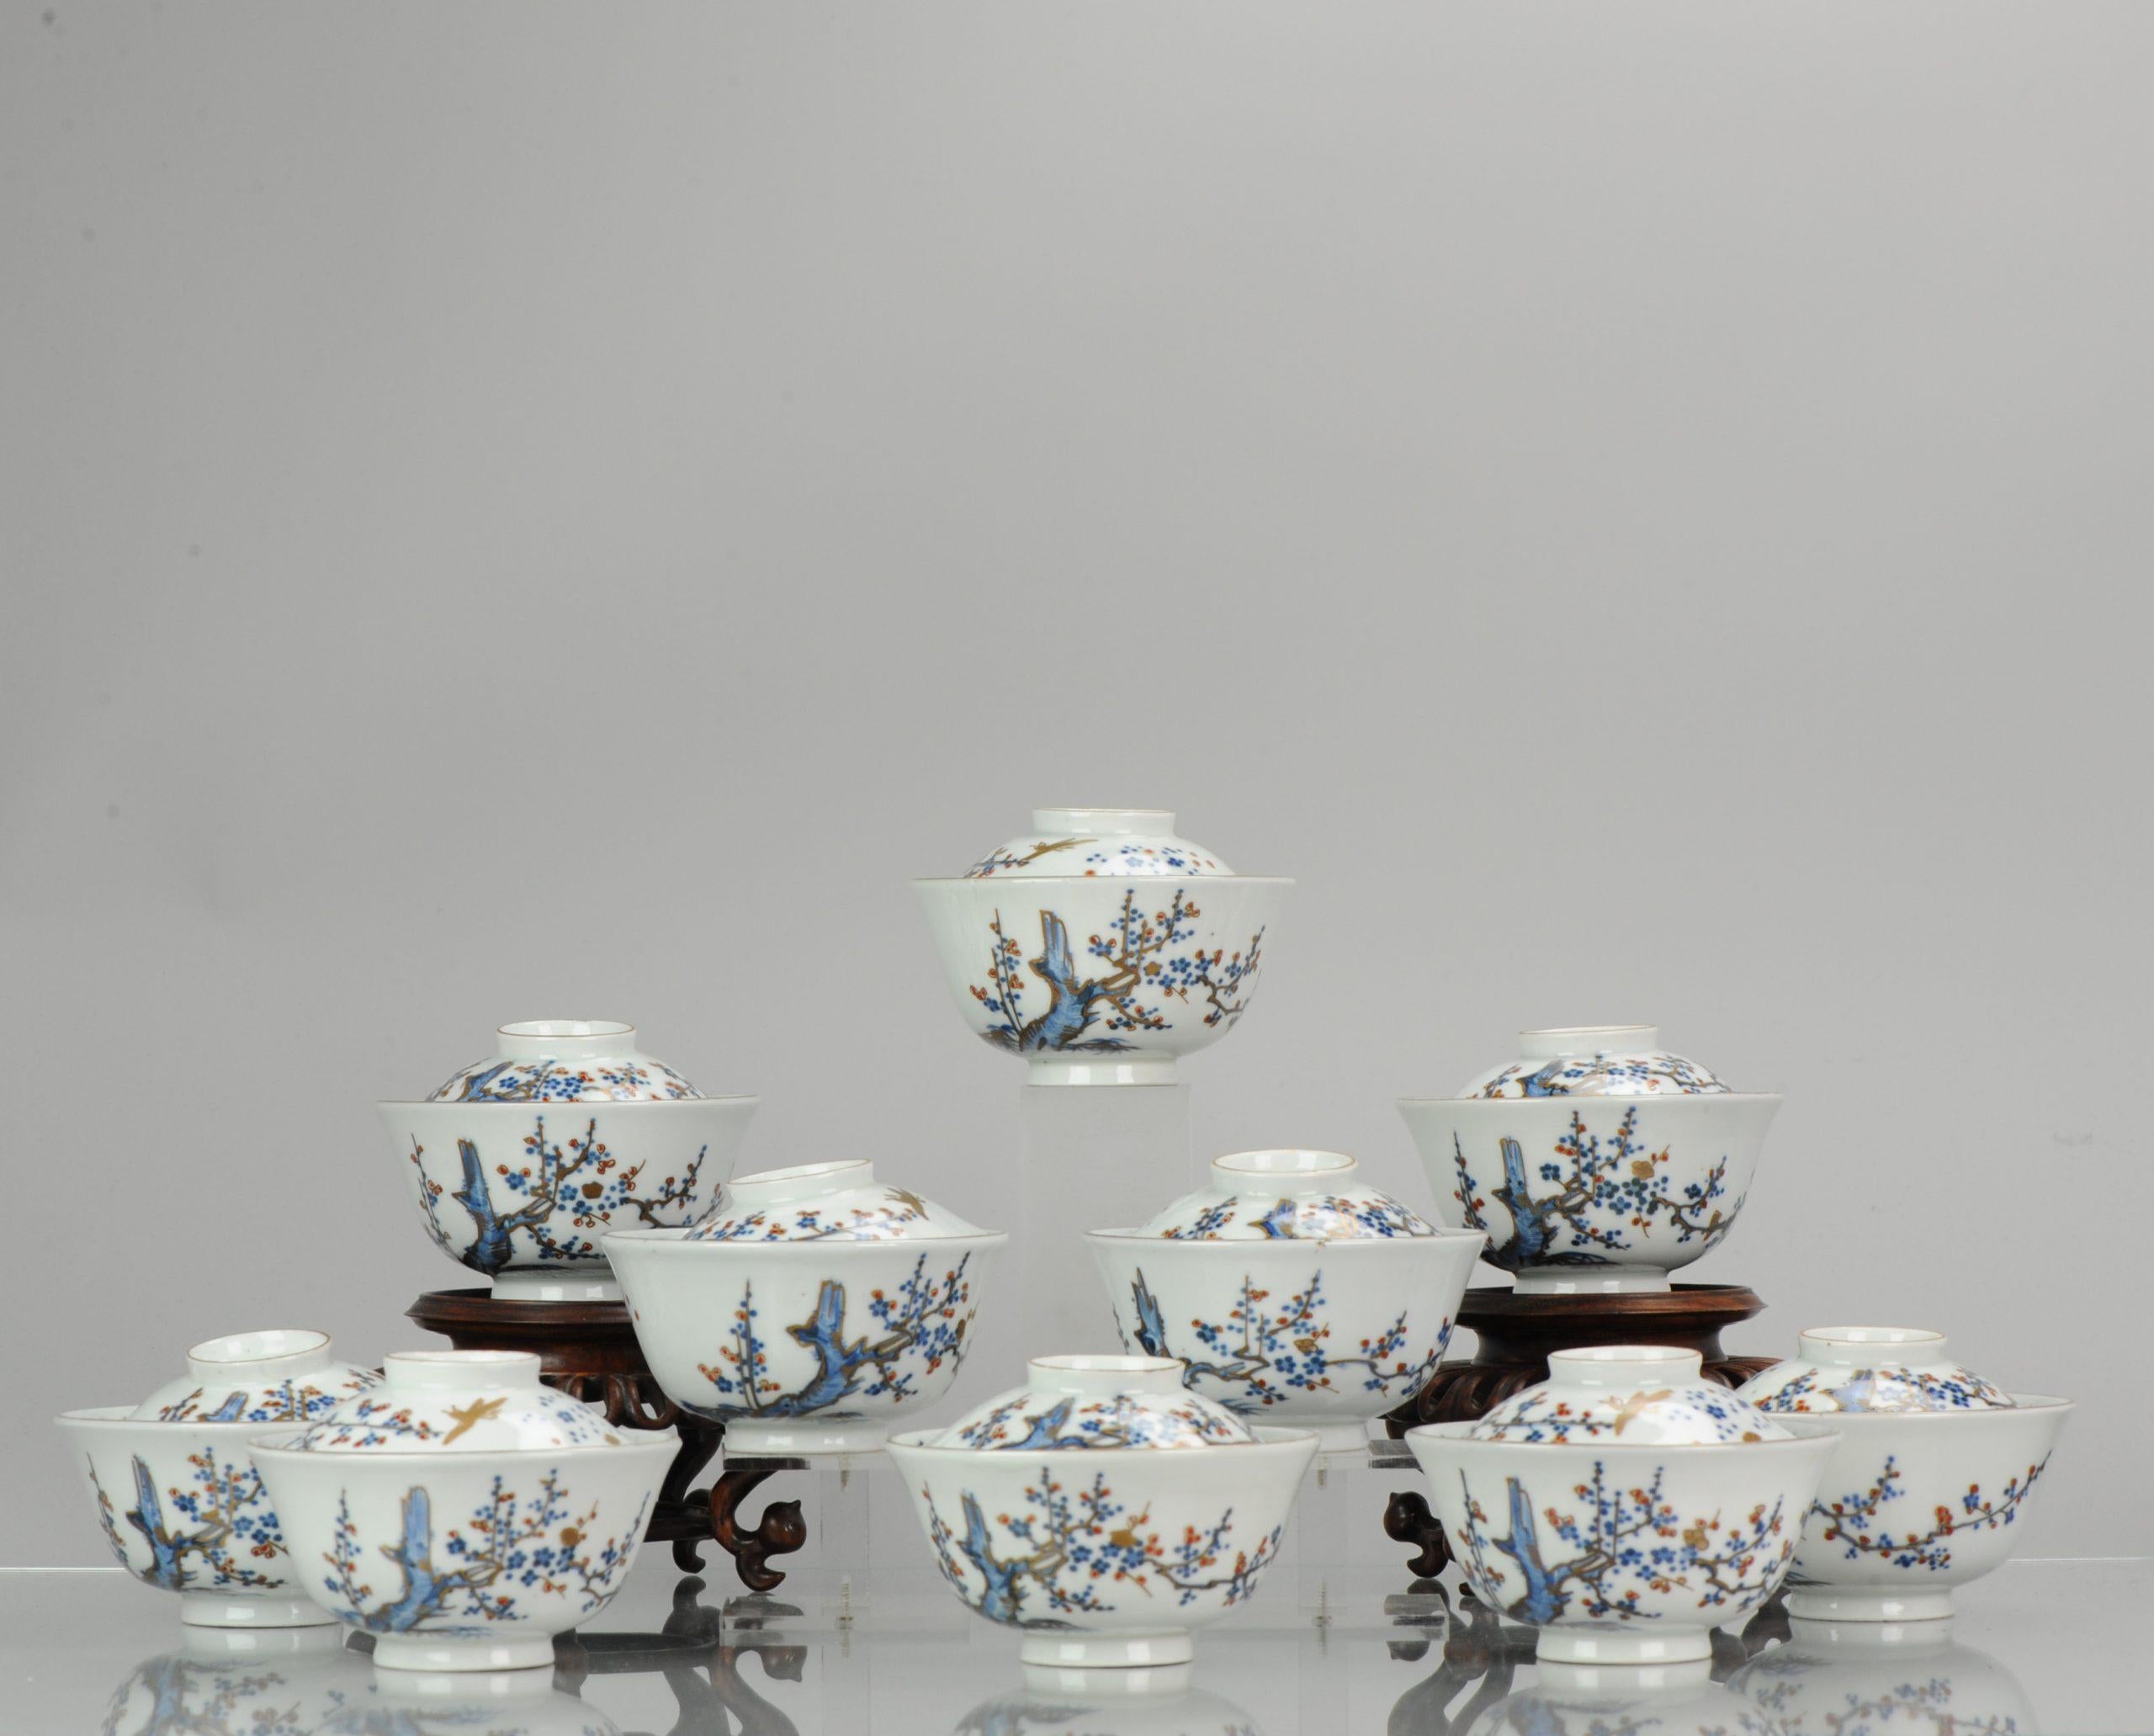 A very nicely decorated set of tea gaiwan bowls

Condition:
All damages pictured, nothing serious. Measures: 117 x 73mm
Period
18th century
19th century.